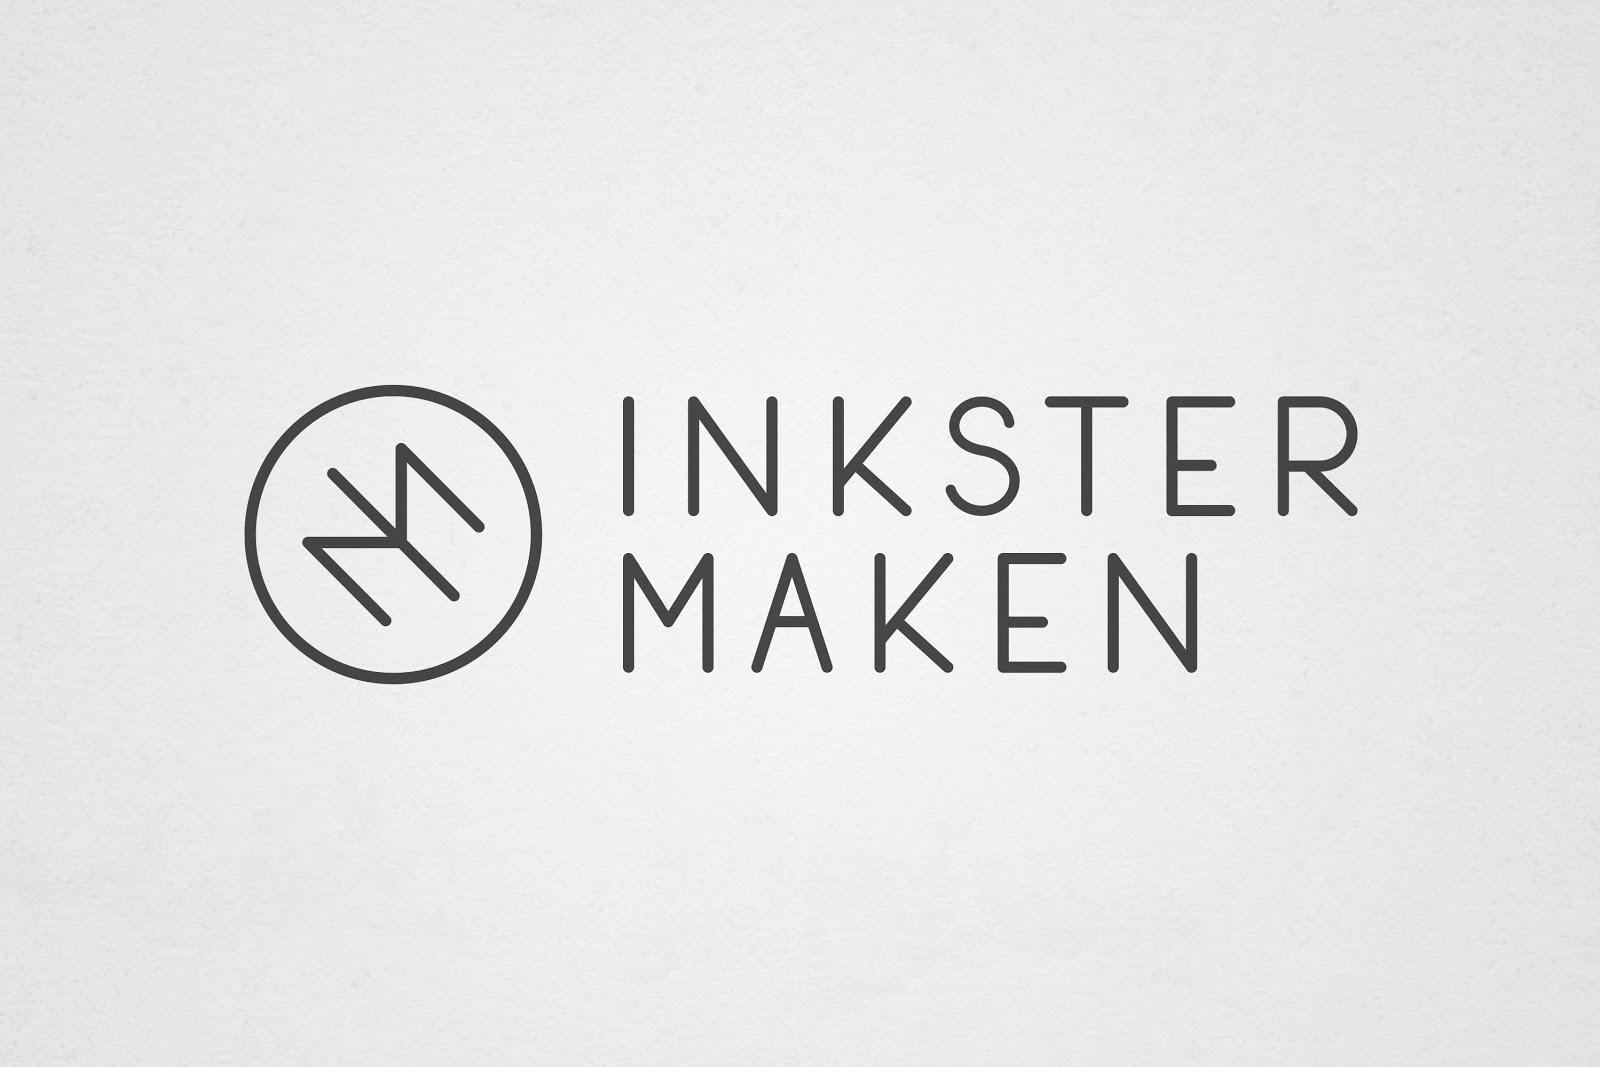 The Hungry Workshop for Inkster Maken